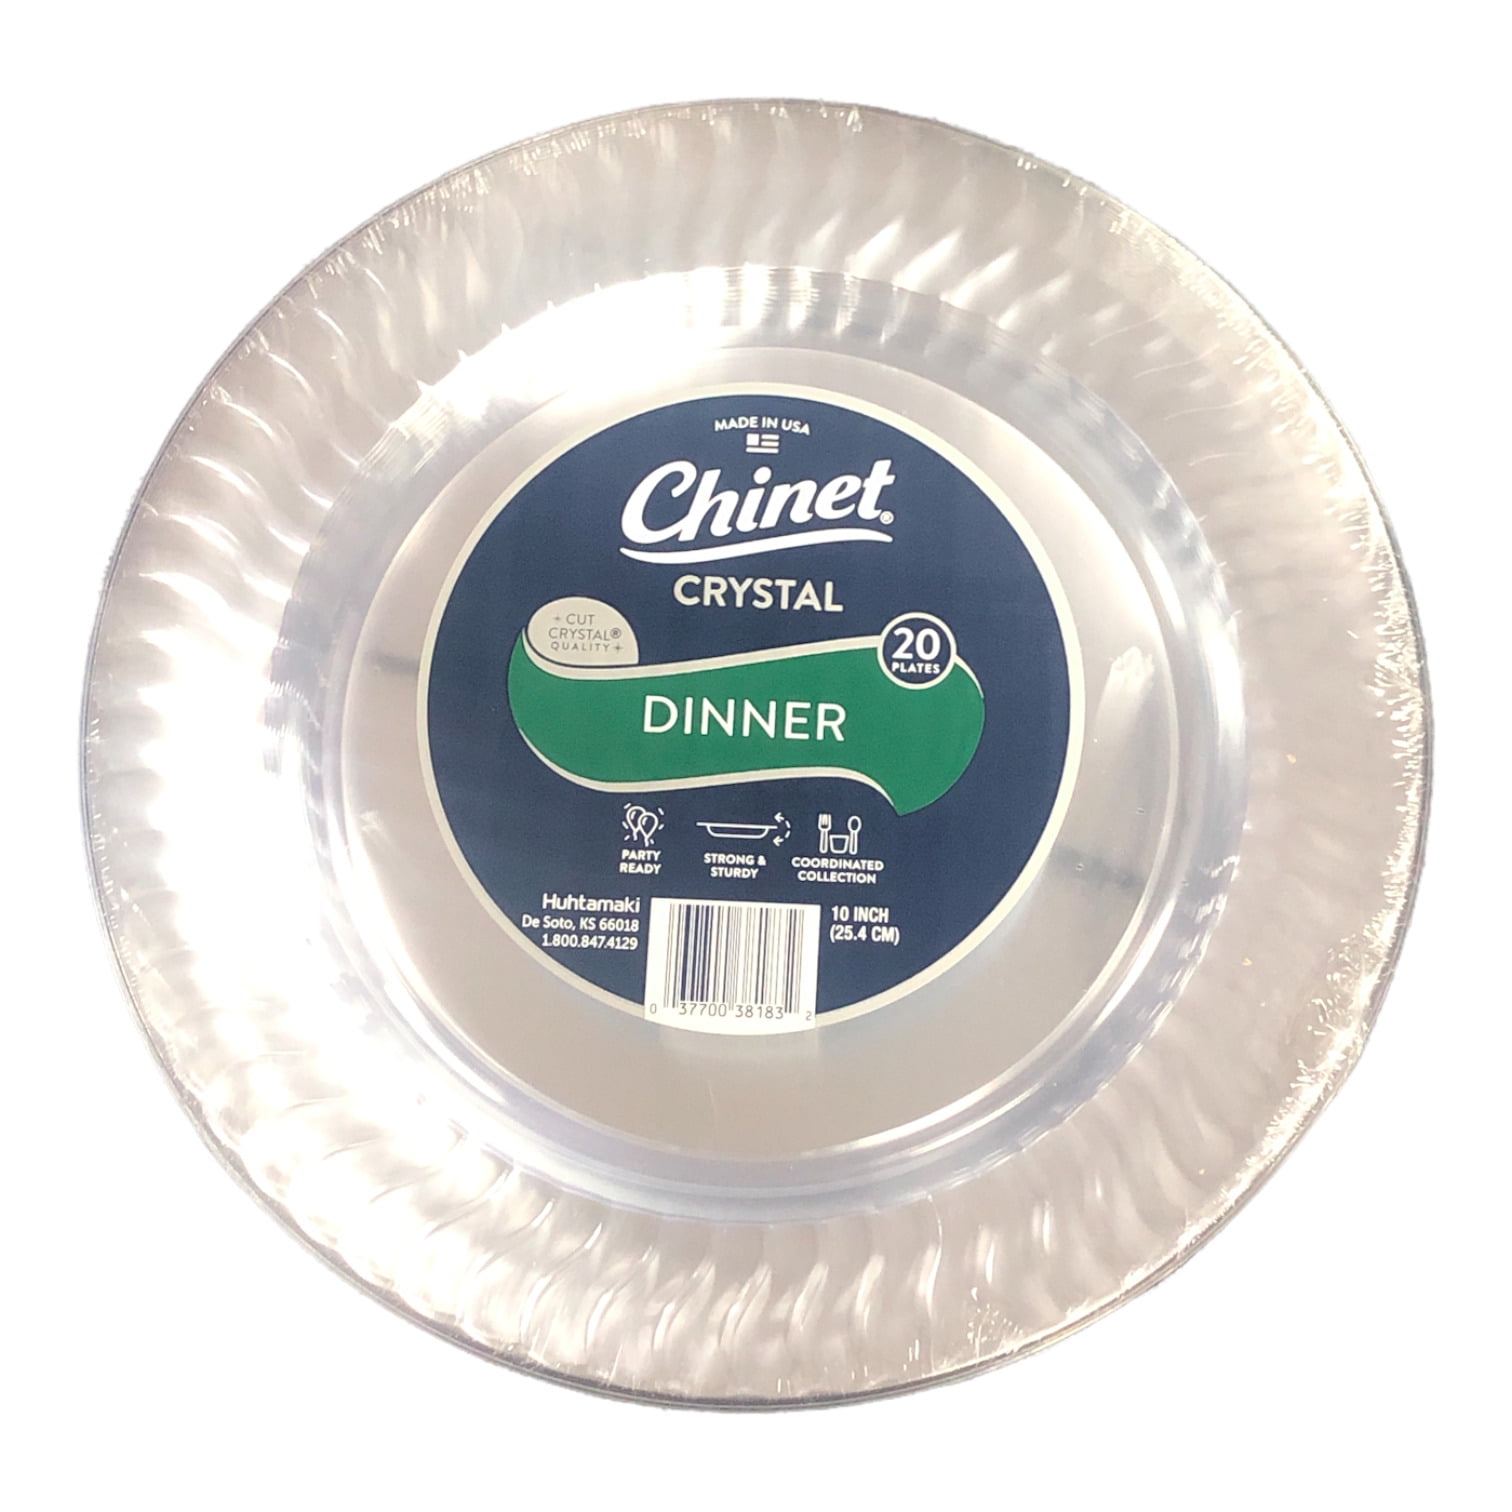 Chinet Cut Crystal Clear Plastic 10 Dinner Plates Case (100 Ct.)